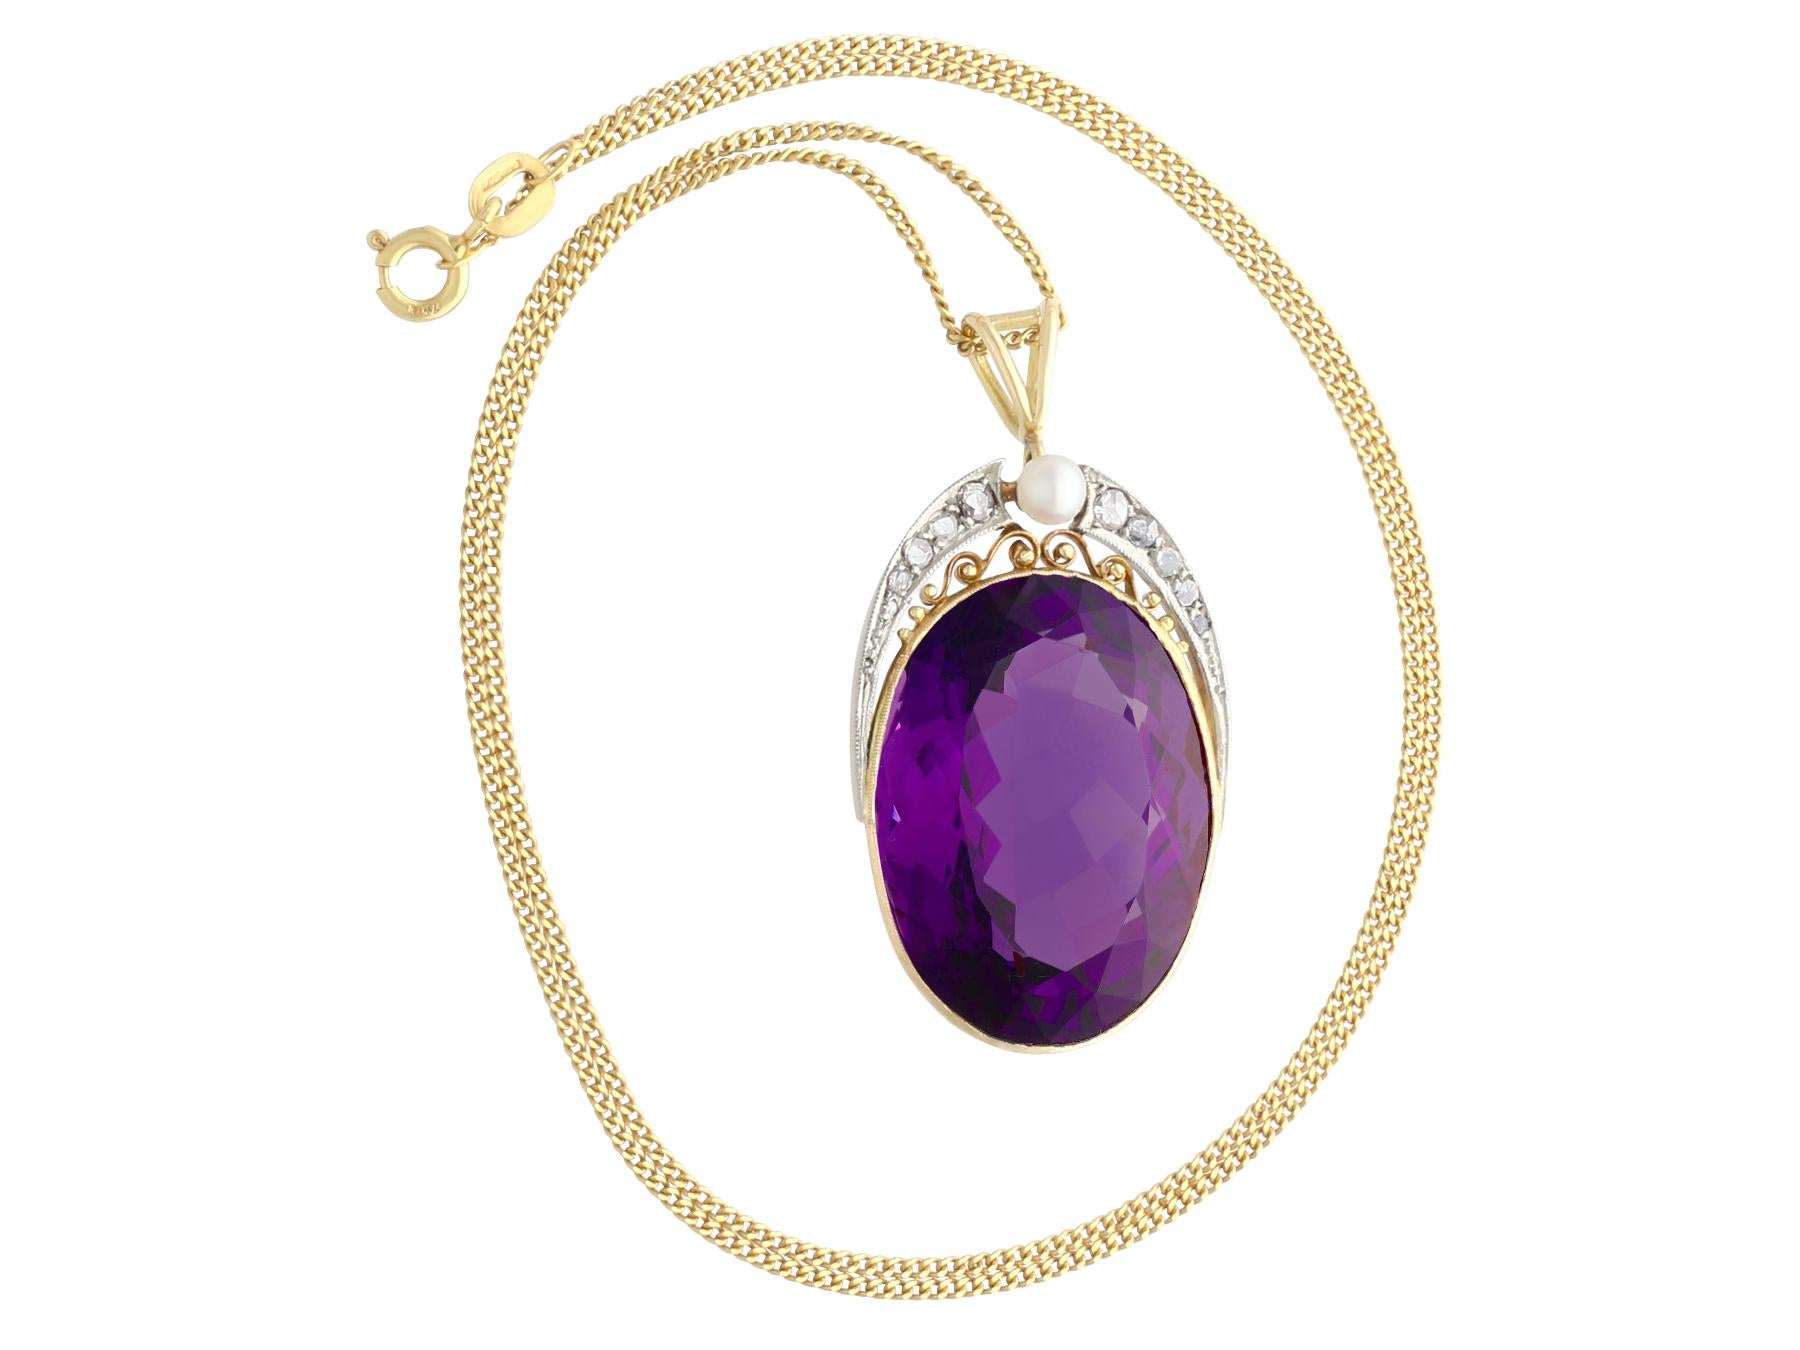 Oval Cut 32.42Ct Amethyst Diamond and Cultured Pearl Yellow Gold and Platinum Pendant